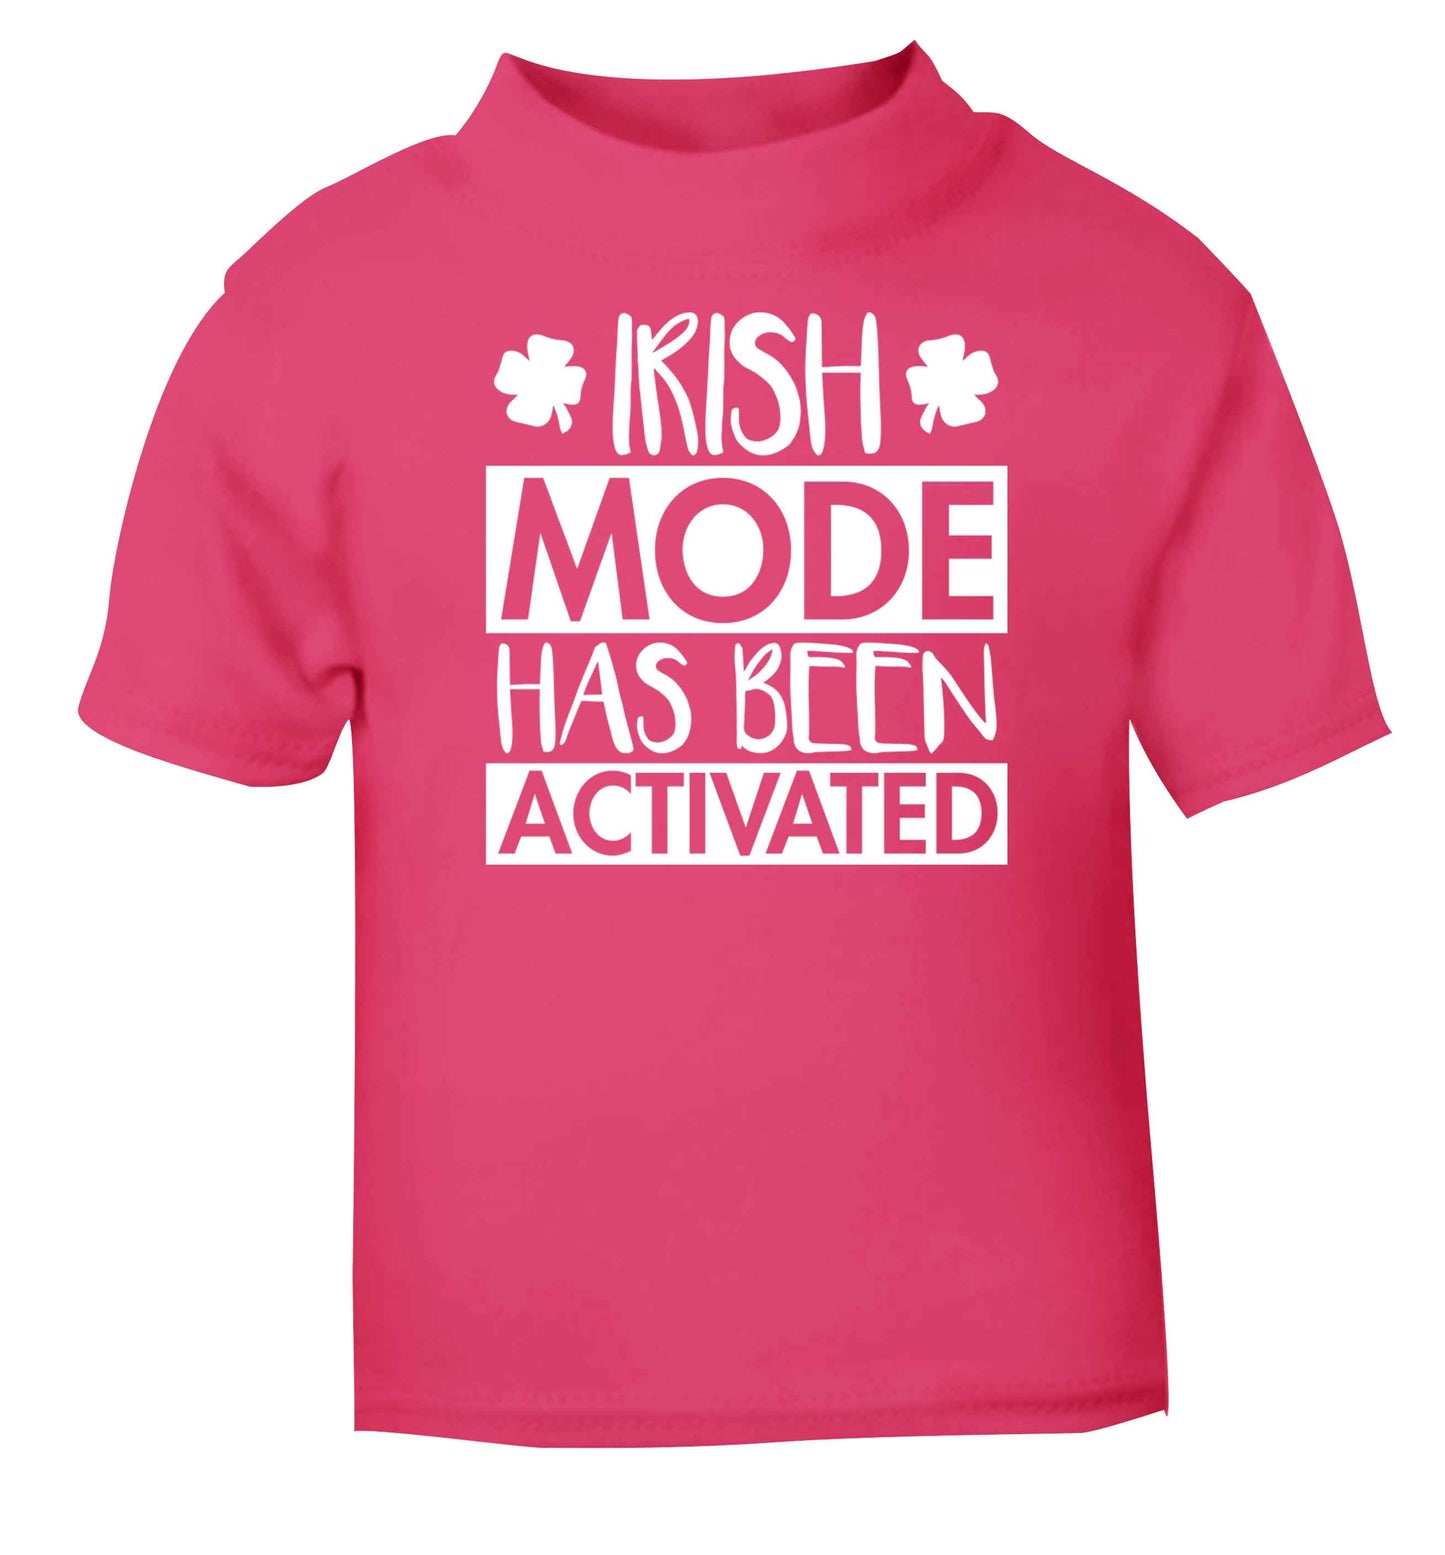 Irish mode has been activated pink baby toddler Tshirt 2 Years